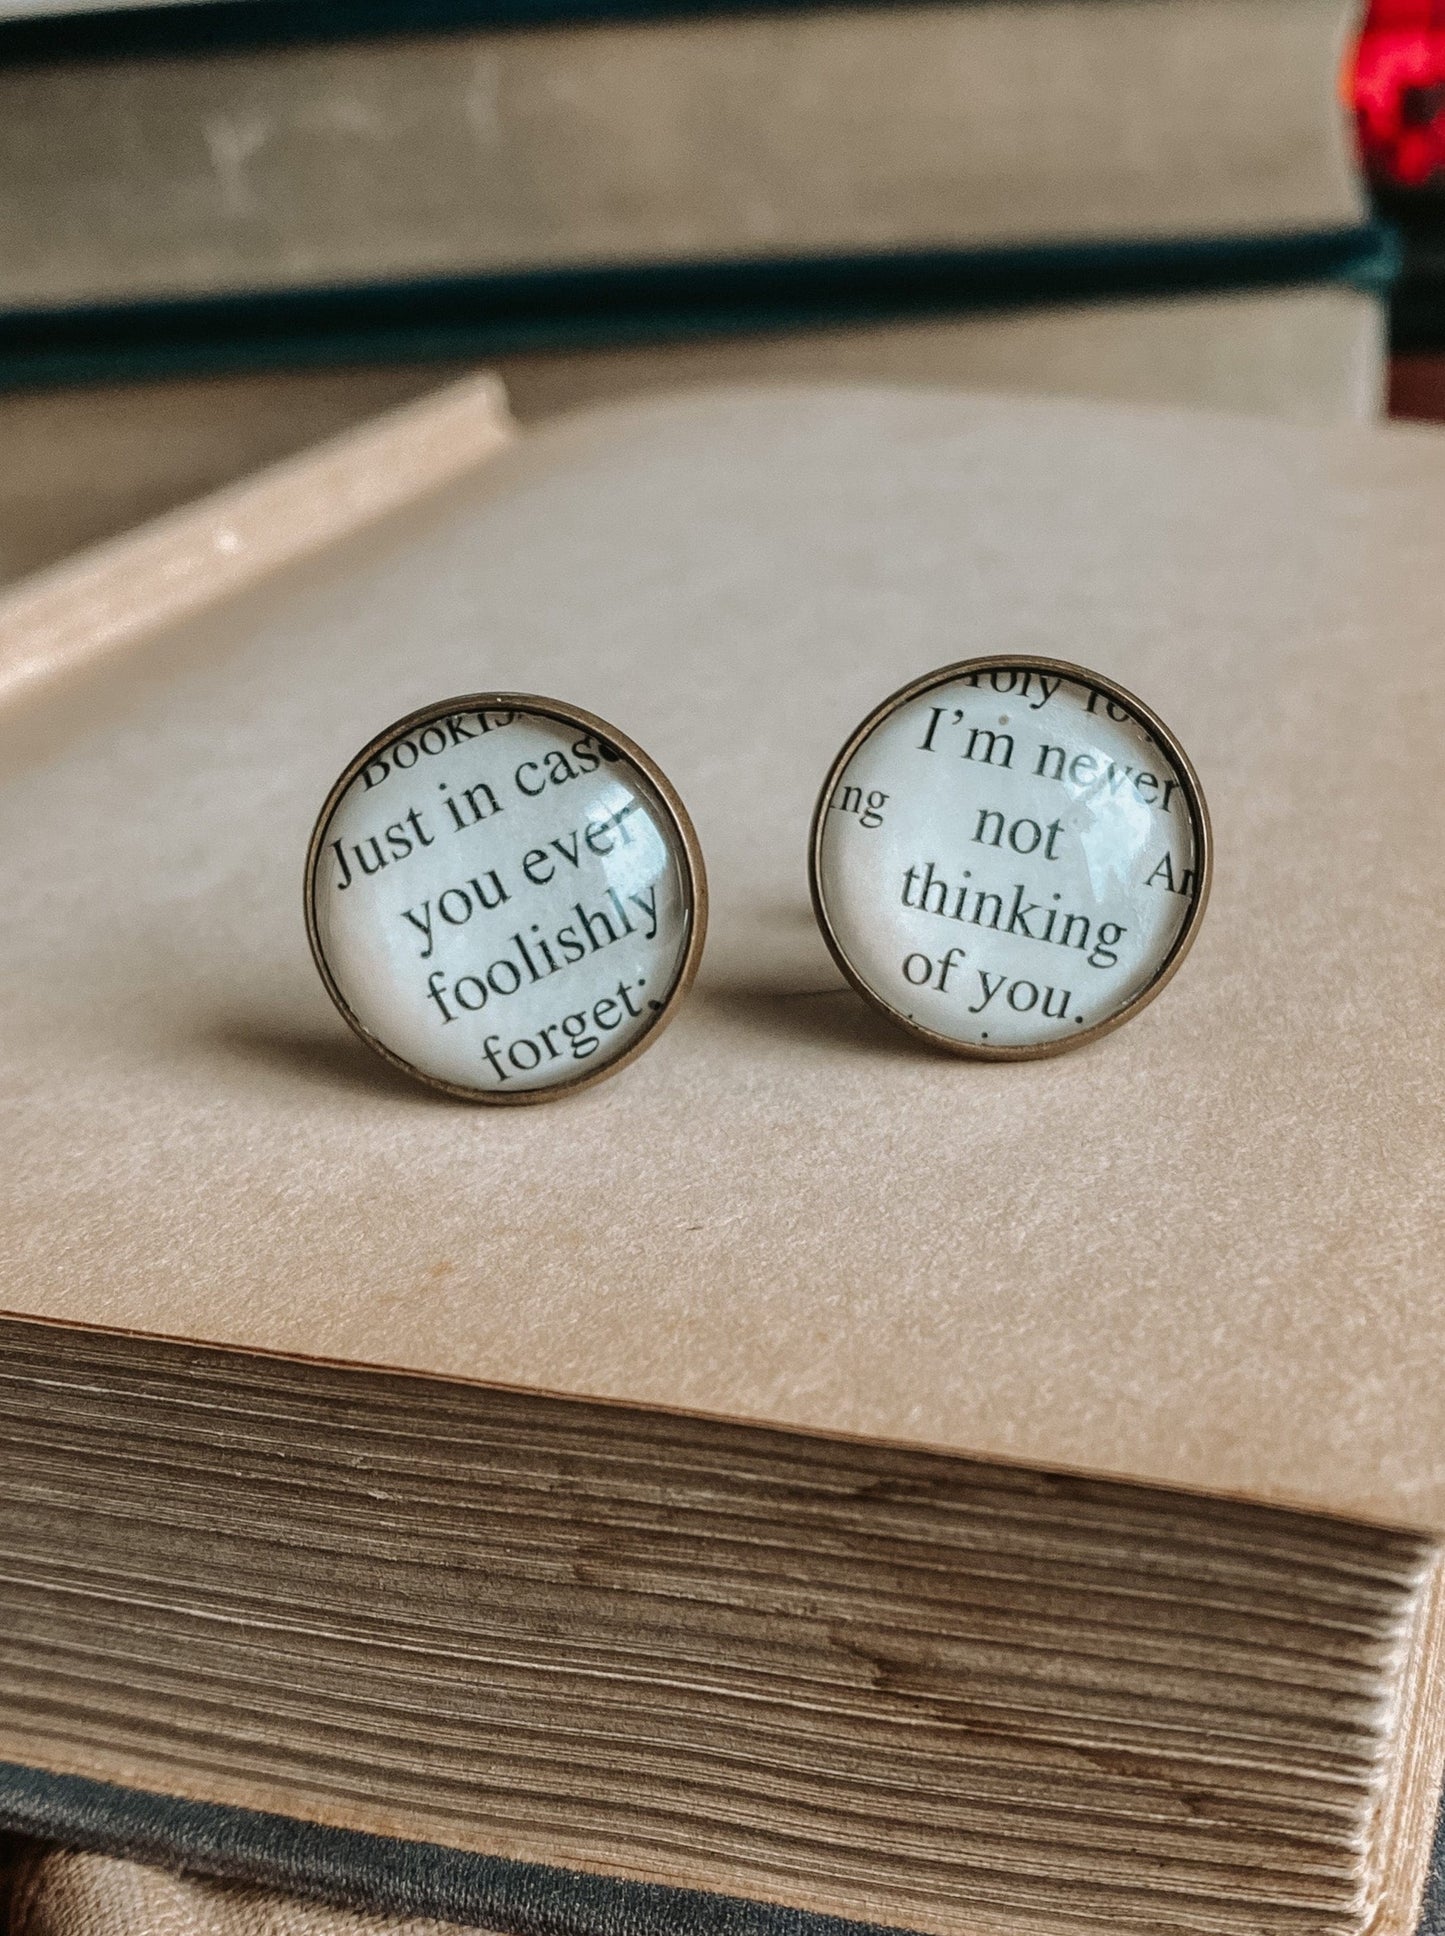 Virginia Woolf Cufflinks: "Never not thinking of you"